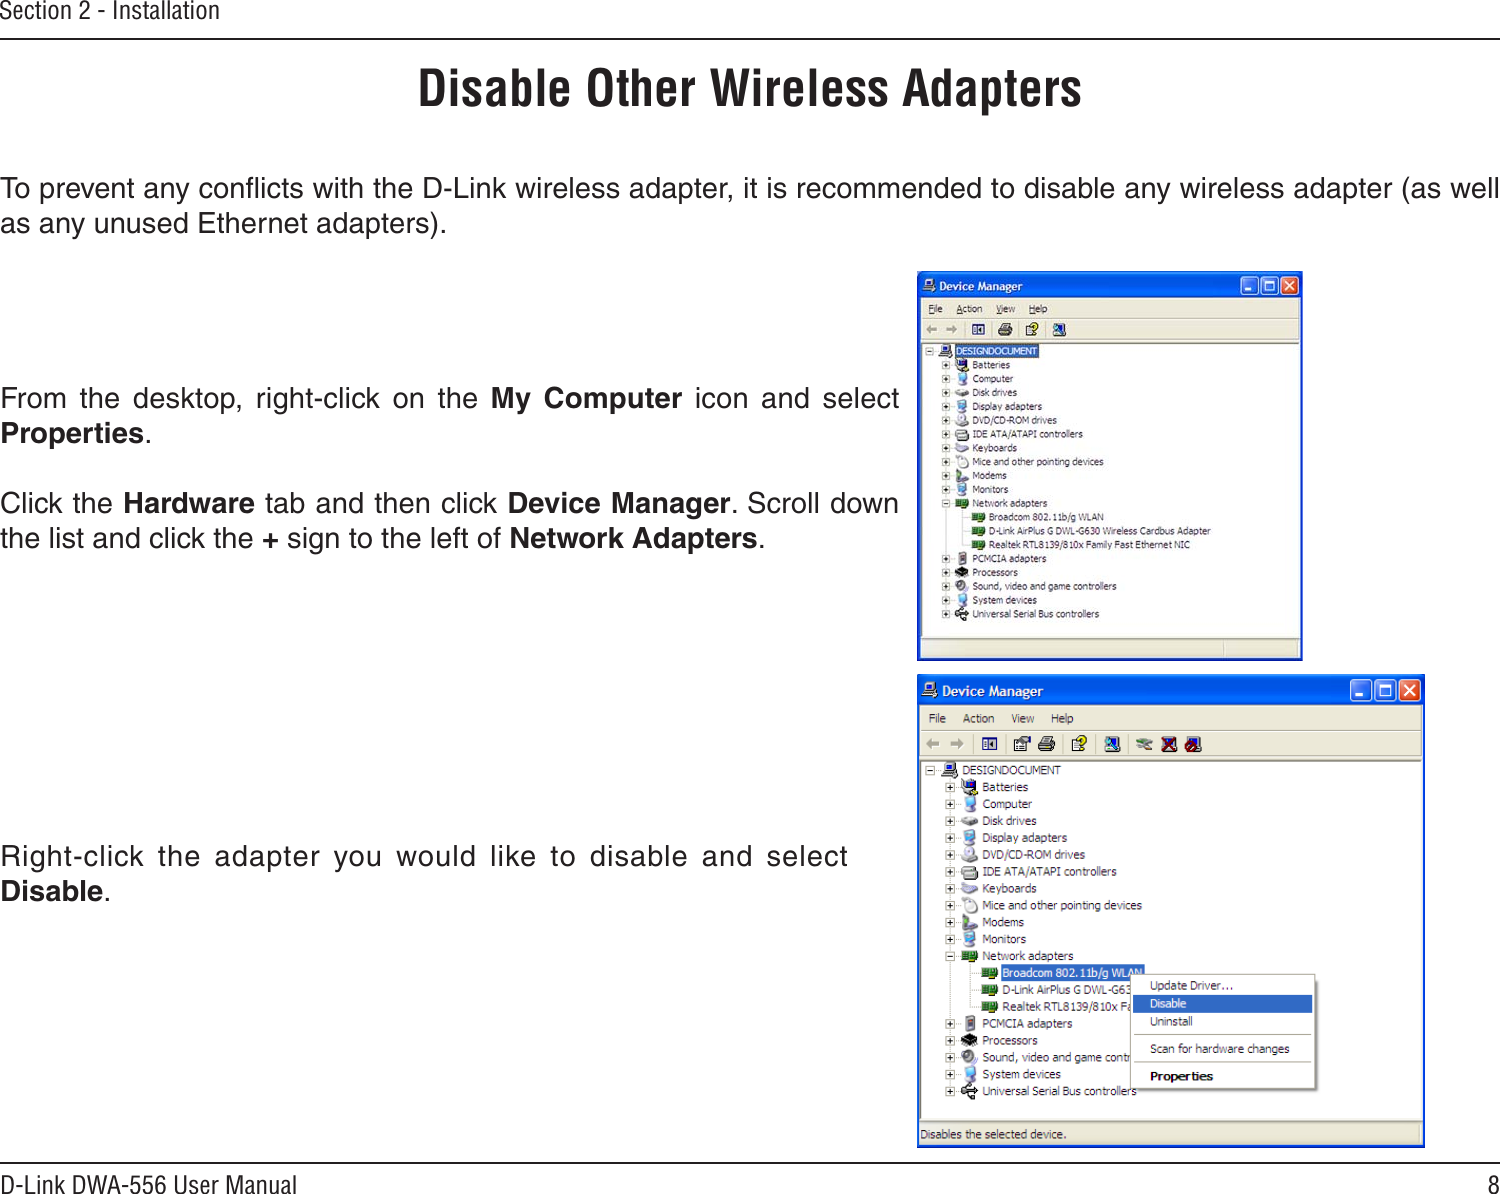 8D-Link DWA-556 User ManualSection 2 - InstallationDisable Other Wireless AdaptersTo prevent any conﬂicts with the D-Link wireless adapter, it is recommended to disable any wireless adapter (as well as any unused Ethernet adapters).From  the  desktop,  right-click  on  the  My  Computer  icon  and  select Properties. Click the Hardware tab and then click Device Manager. Scroll down the list and click the + sign to the left of Network Adapters.Right-click  the  adapter  you  would  like  to  disable  and  select Disable.